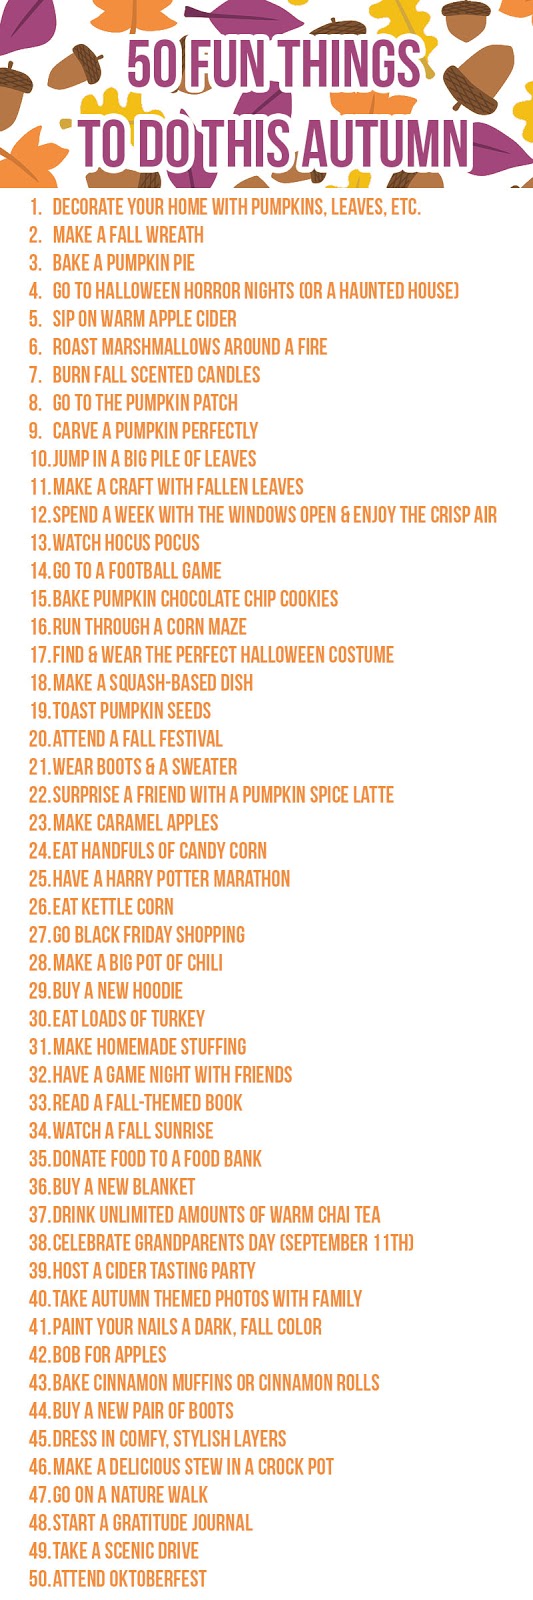 Fall is right around the corner, be sure to add these 50 fall activities to your bucket list! Autumn is the best season, am I right?!